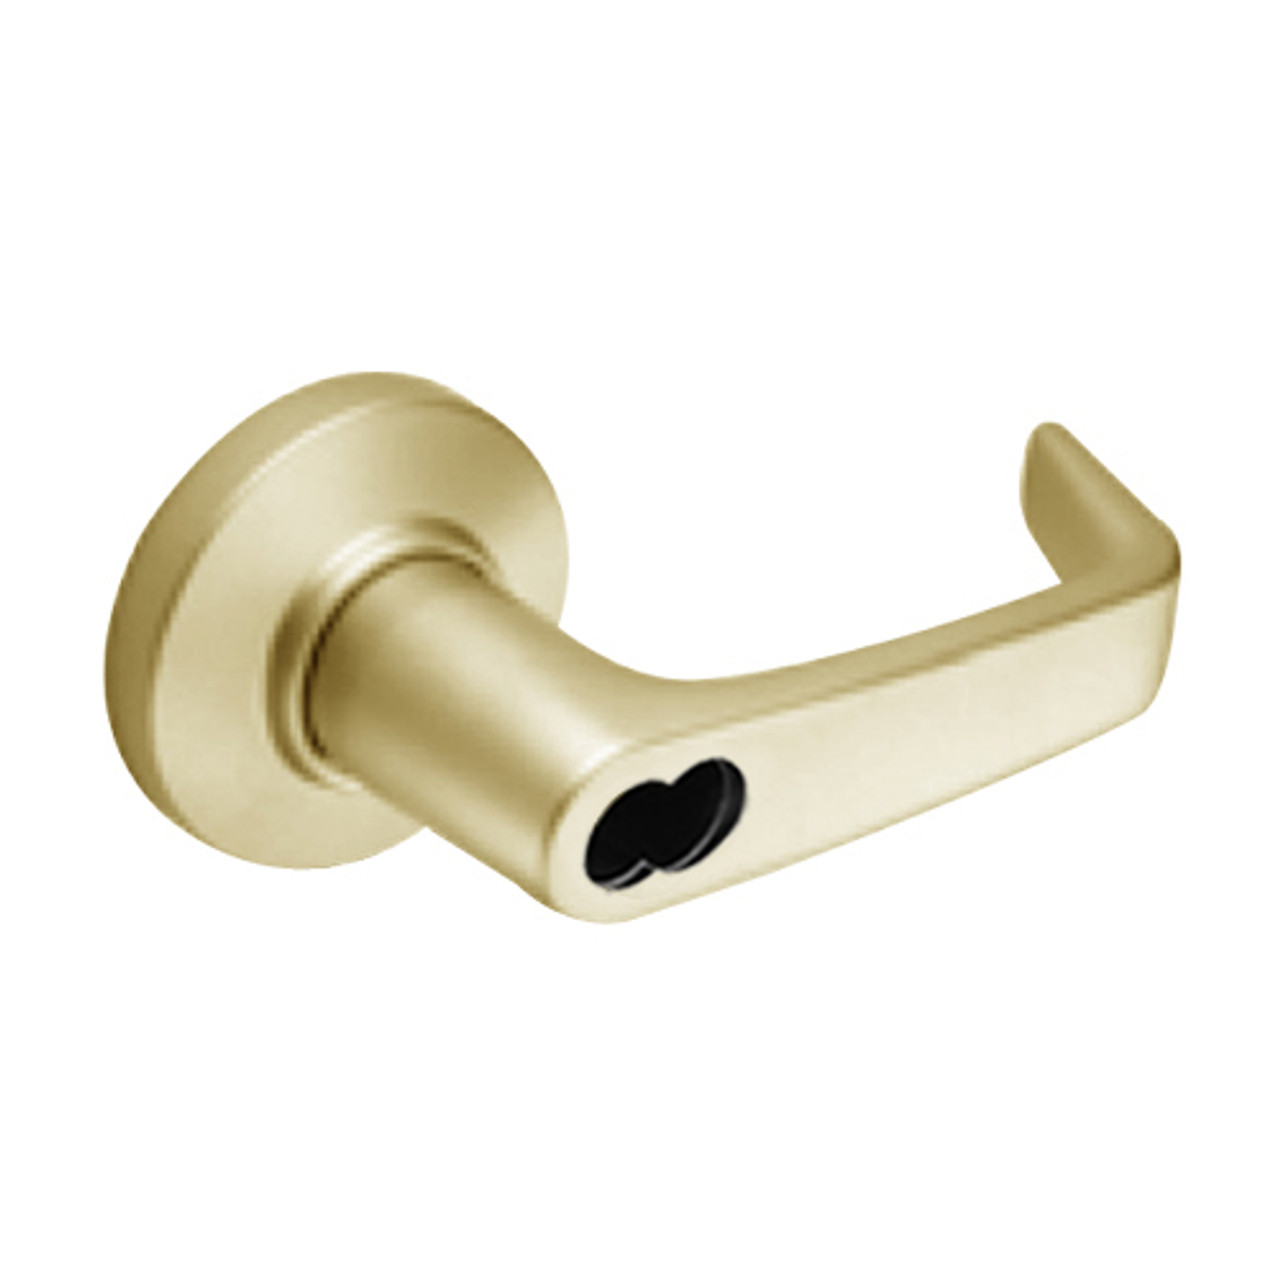 9K37A15CS3606 Best 9K Series Dormitory or Storeroom Cylindrical Lever Locks with Contour Angle with Return Lever Design Accept 7 Pin Best Core in Satin Brass